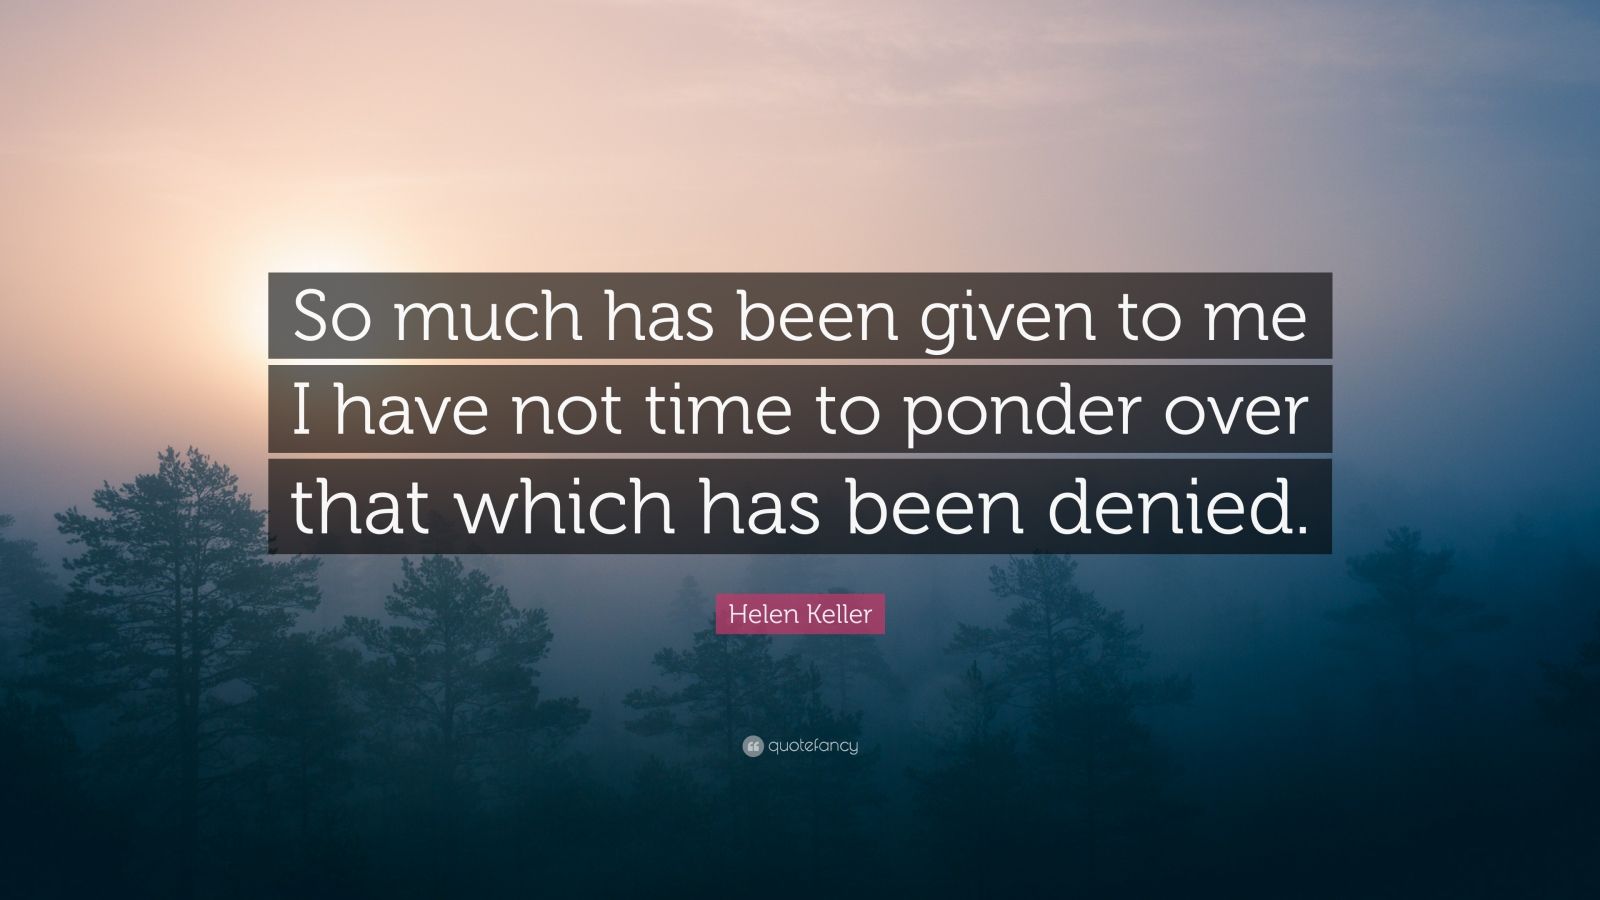 Helen Keller Quote: “So much has been given to me I have not time to ...